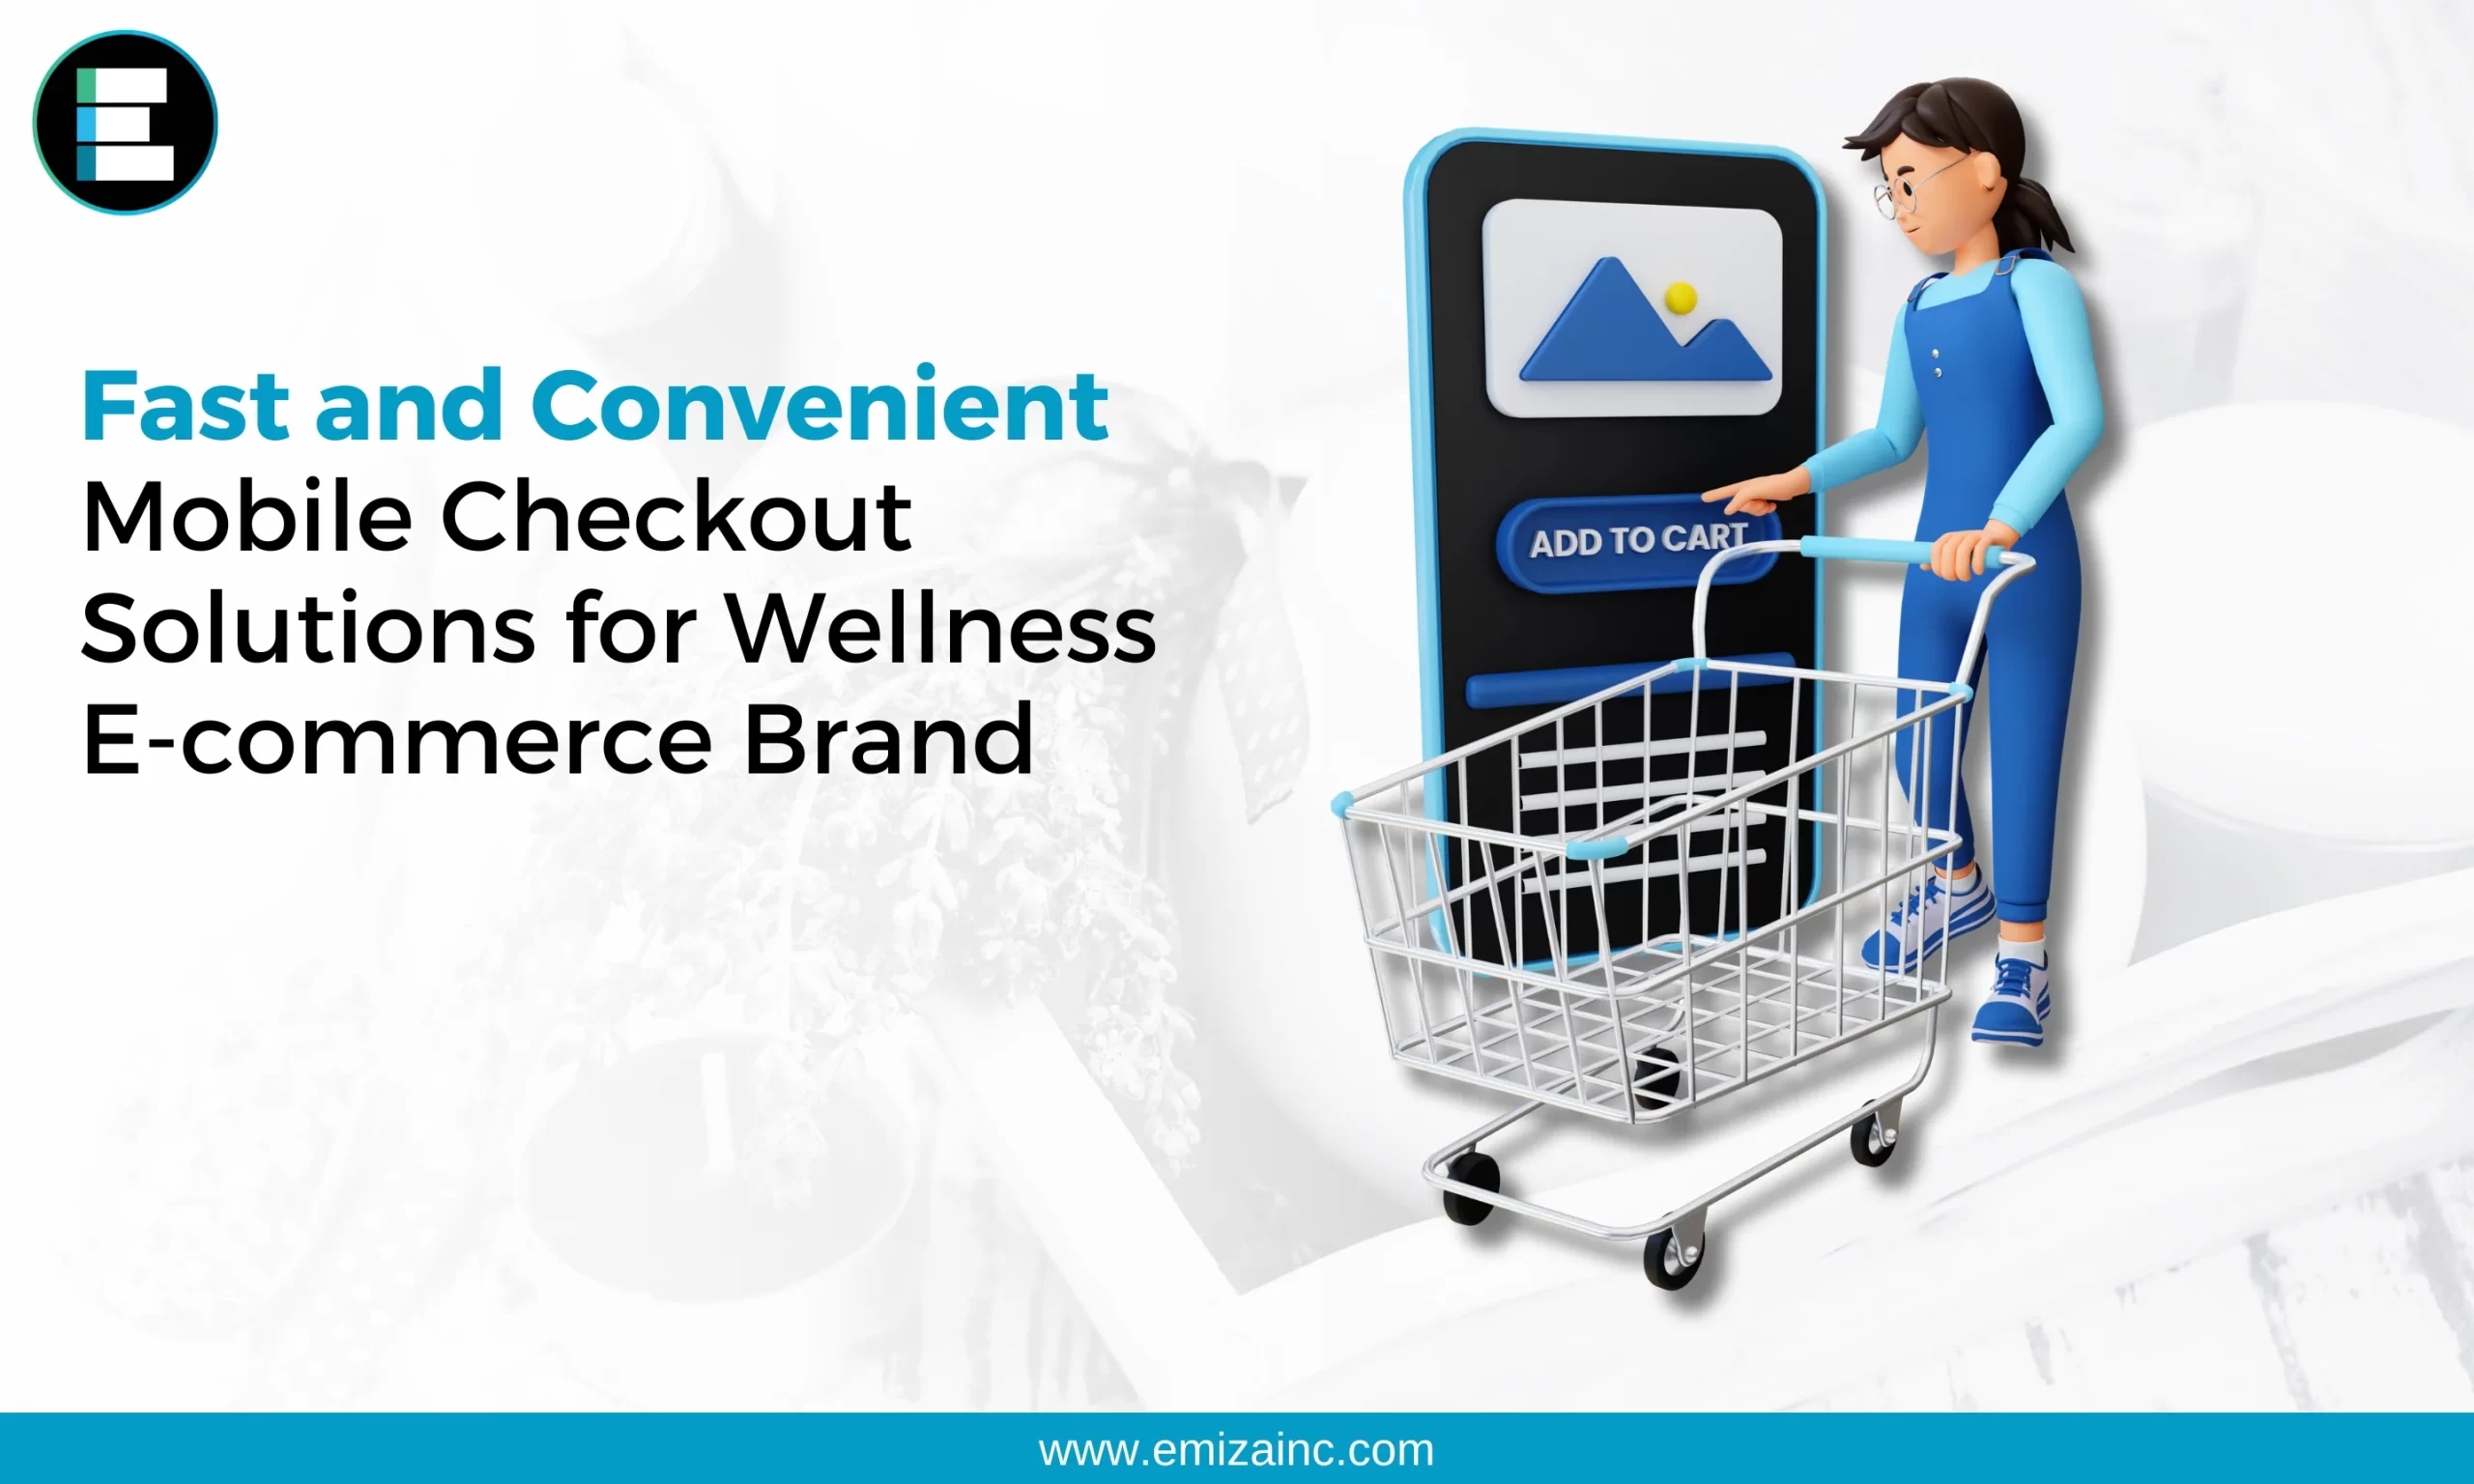 Fast and Convenient Mobile Checkout Solutions for welness E-commerce brand